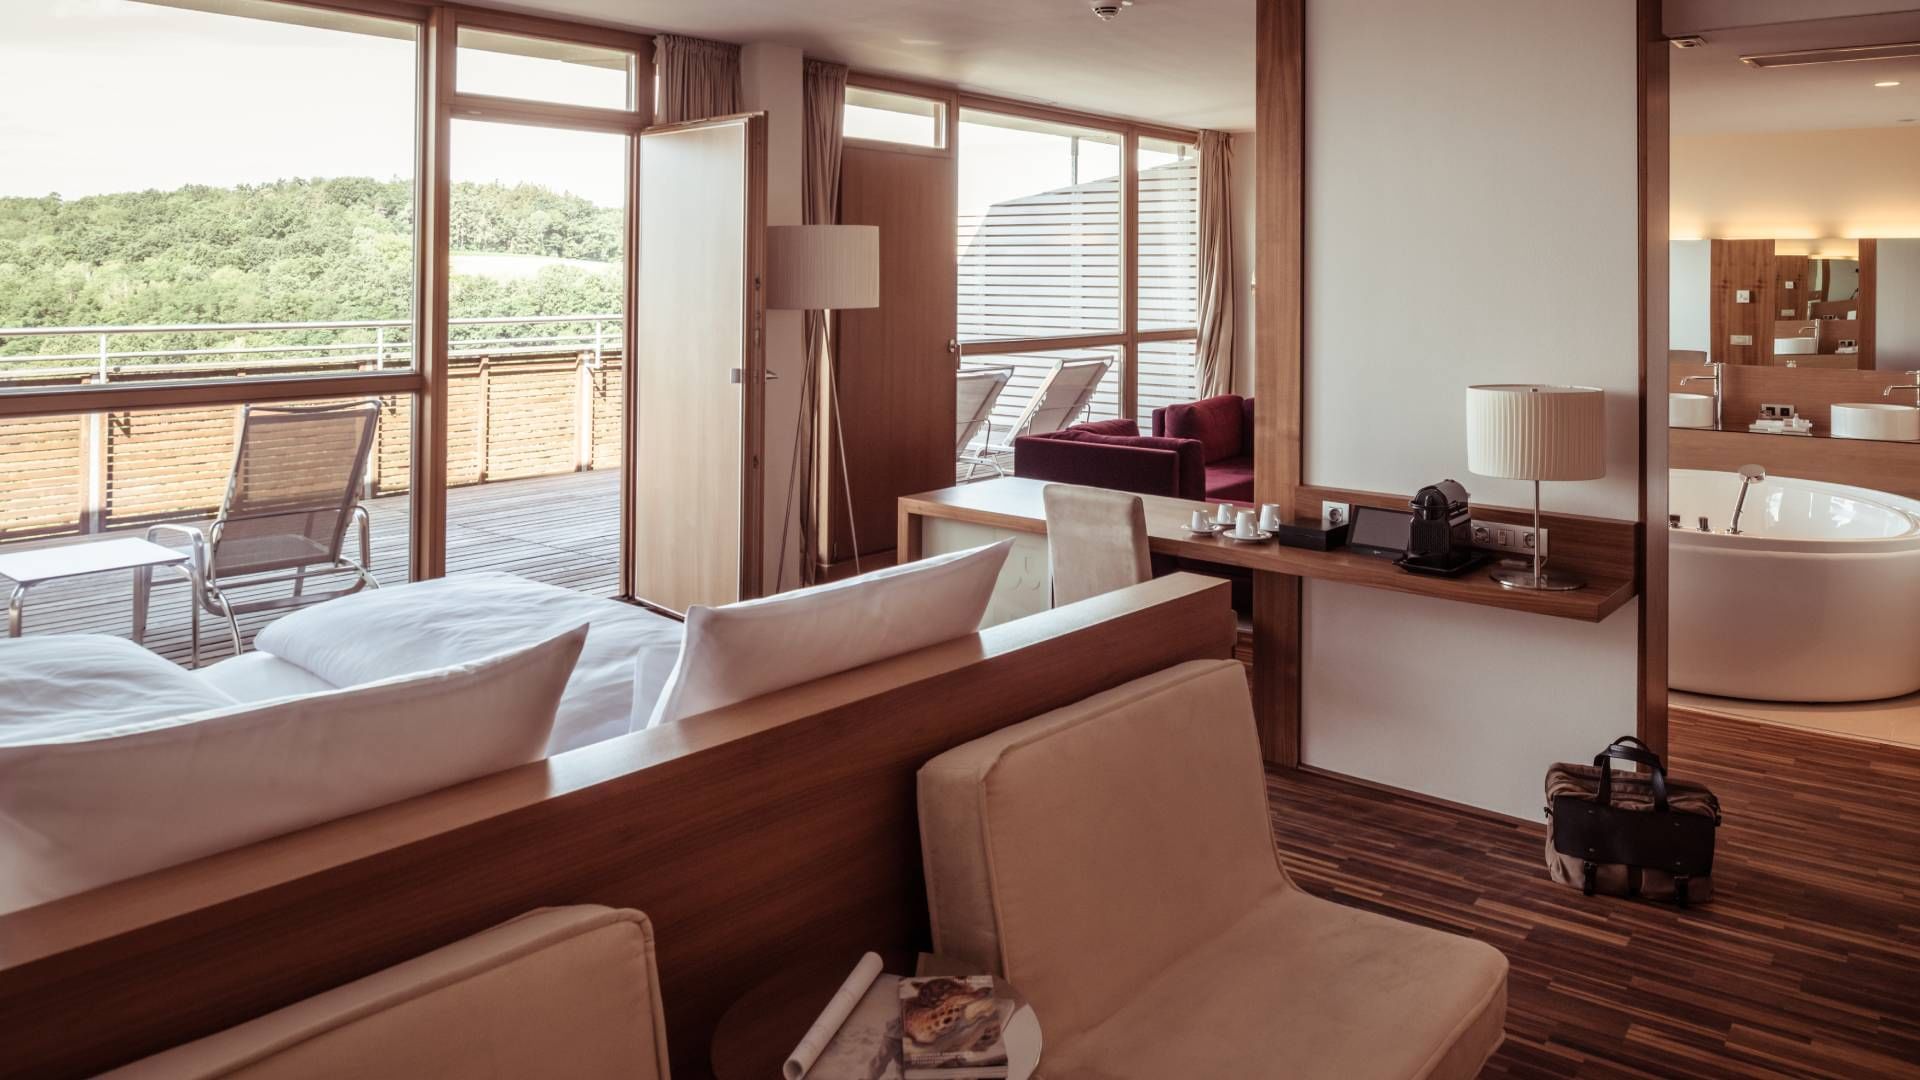 Spa Suite with Whirlpool Lounge at Falkensteiner Balance Resort